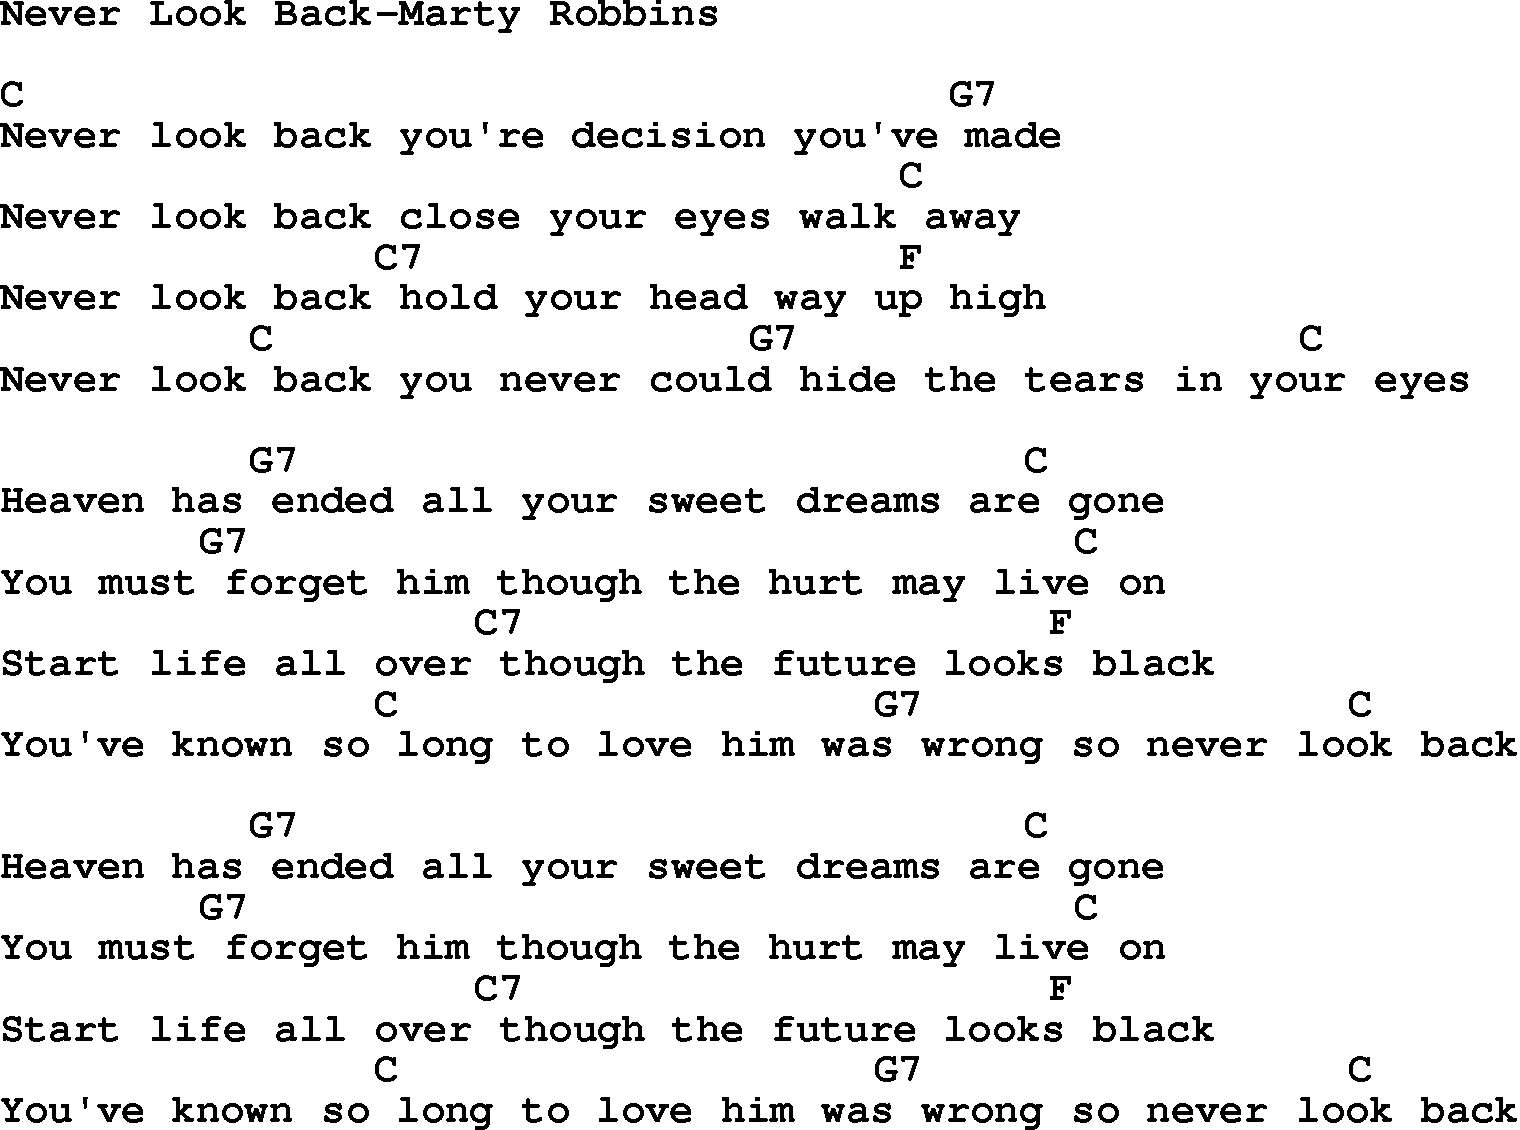 Country music song: Never Look Back-Marty Robbins lyrics and chords